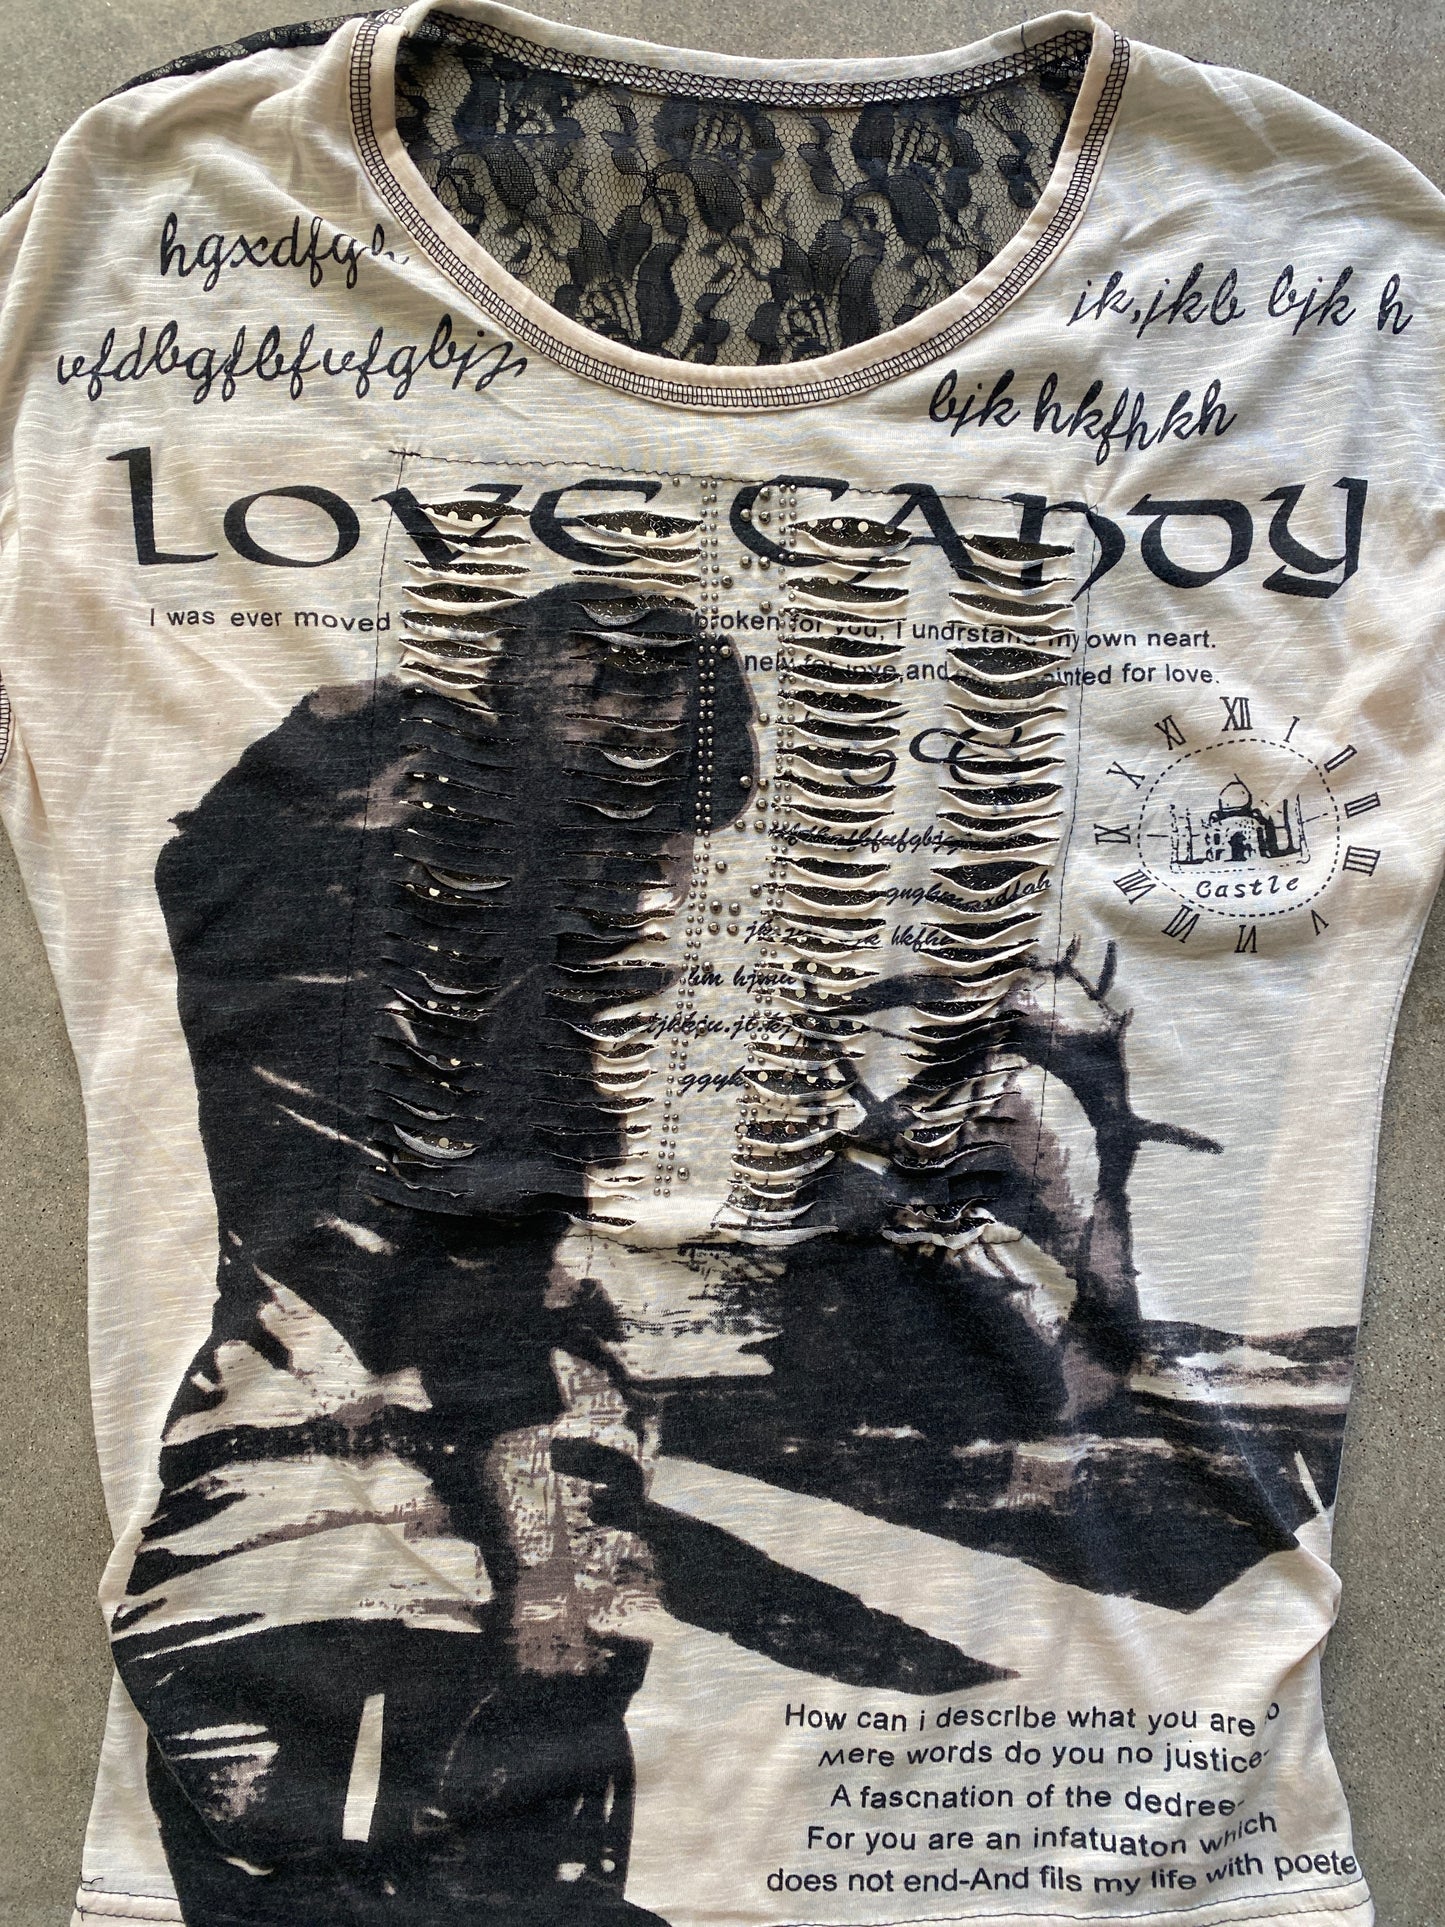 00's Love Candy Graphic Print Top